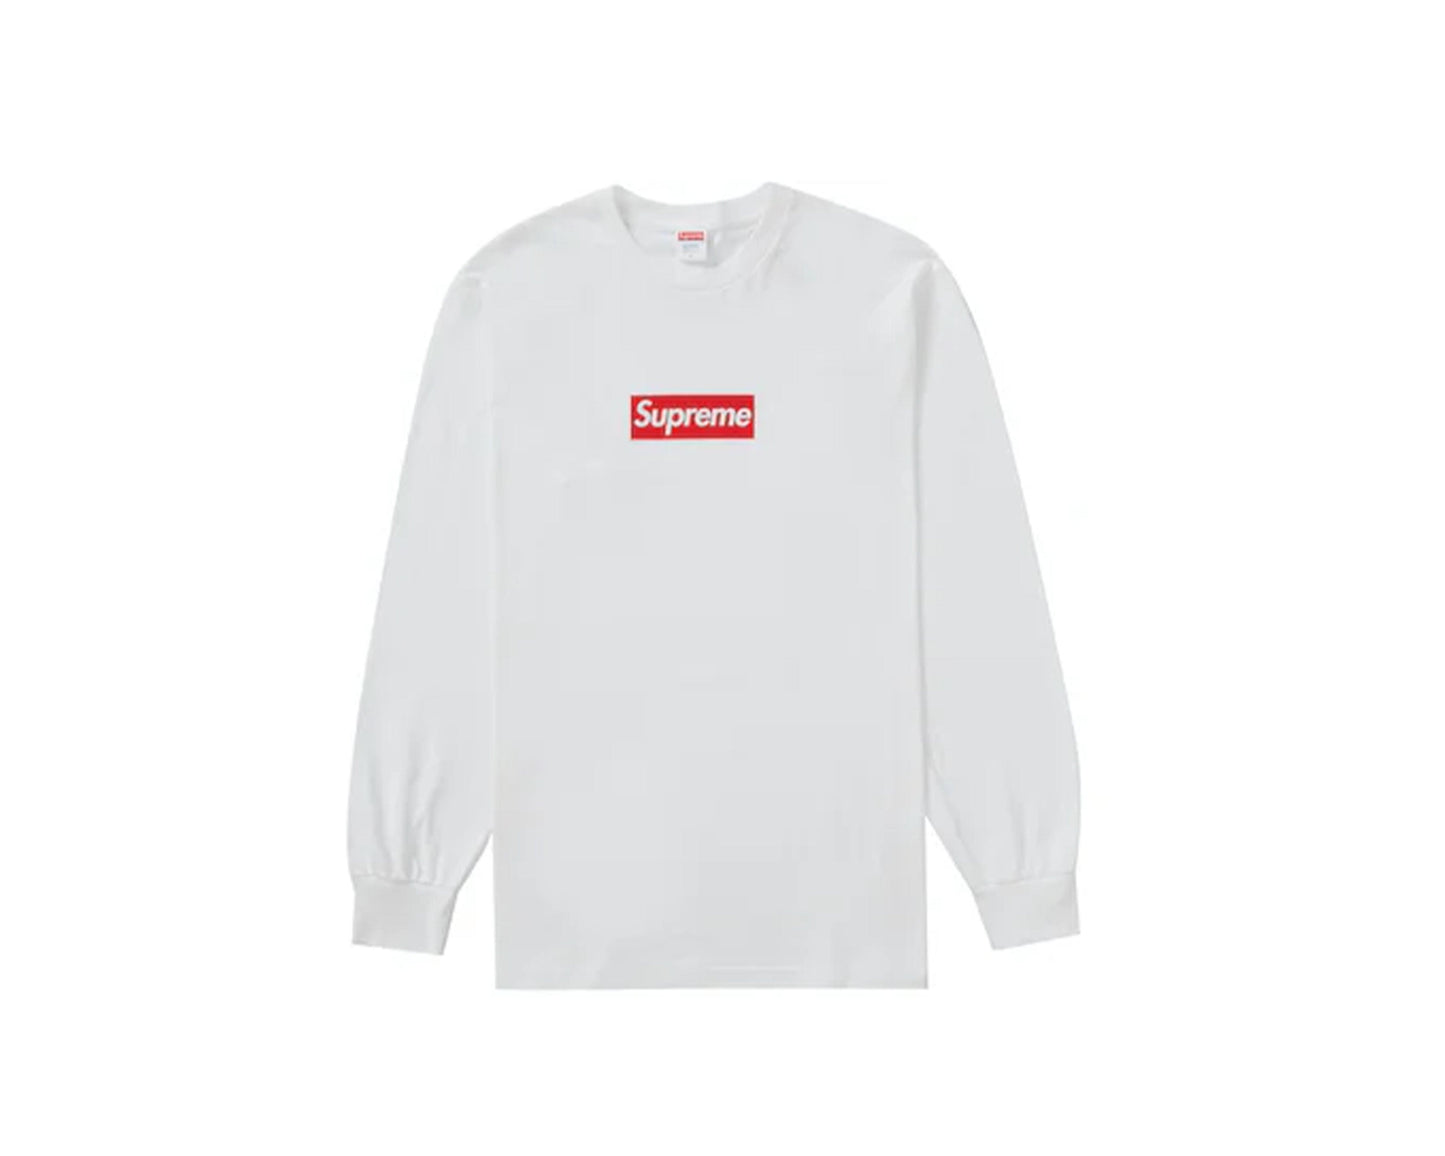 Supreme Box Logo L/S Tee White - Only at www.BallersClubKickz.com - The Supreme Box Logo L/S Tee features a red Supreme Box Logo on the chest of a white long sleeve t-shirt. These Supreme Box Logo L/S Tees were available in October of 2020.